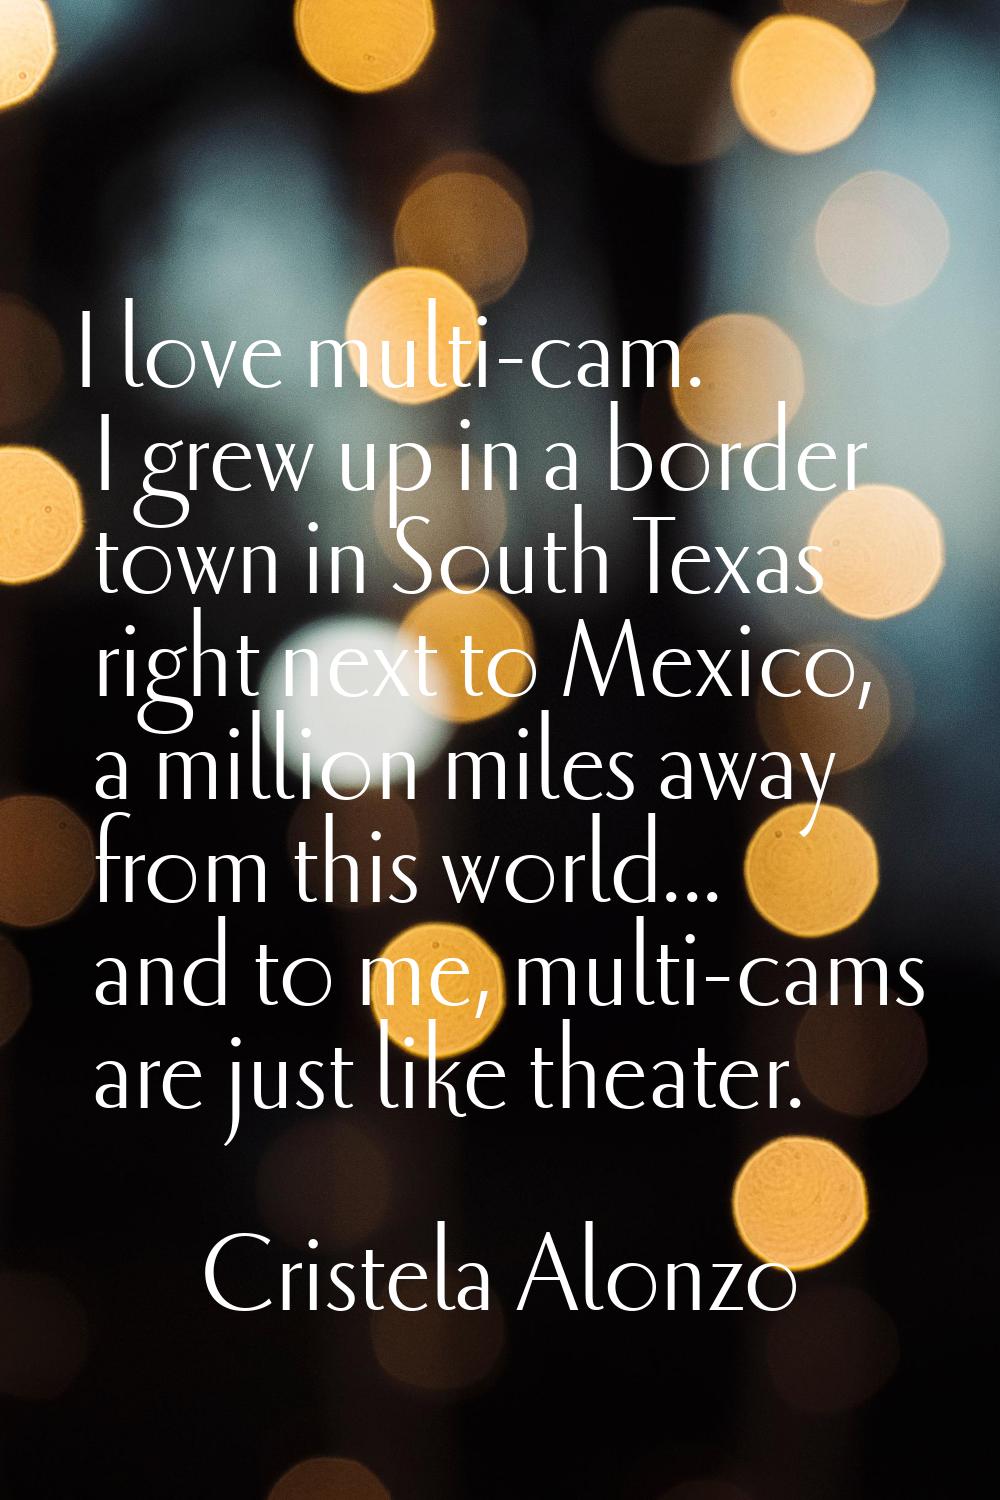 I love multi-cam. I grew up in a border town in South Texas right next to Mexico, a million miles a